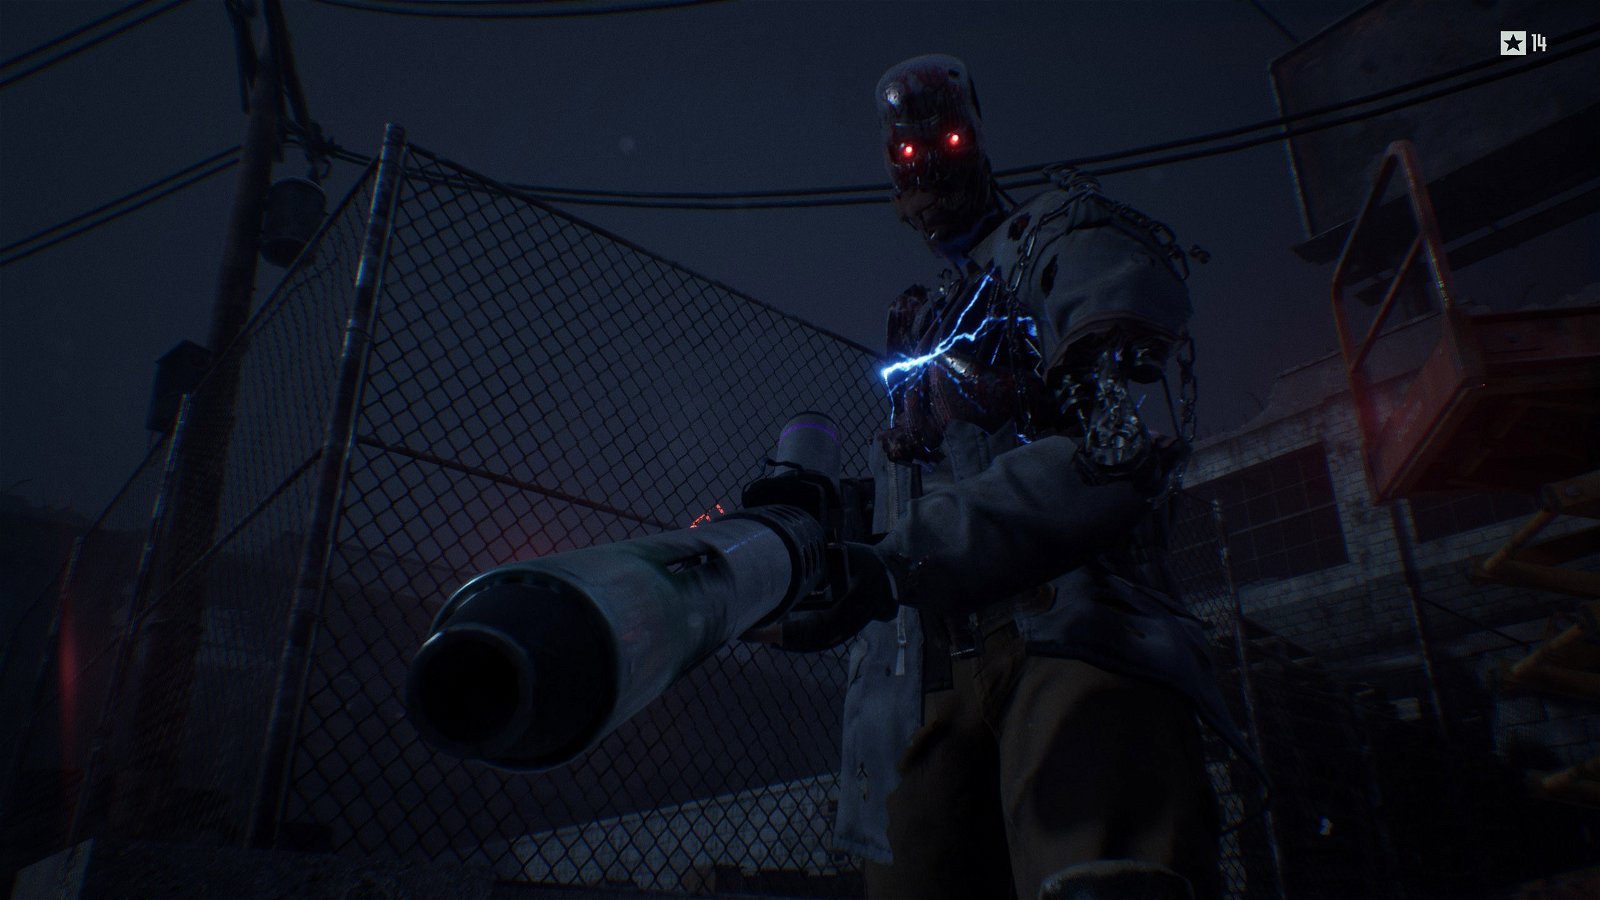 terminator game,terminator: resistance, xone, xbox one ,ps4, playstation 4 ,eu, europe, US, north america, release date, gameplay, features, price, pre-order,reef entertainment, teyon